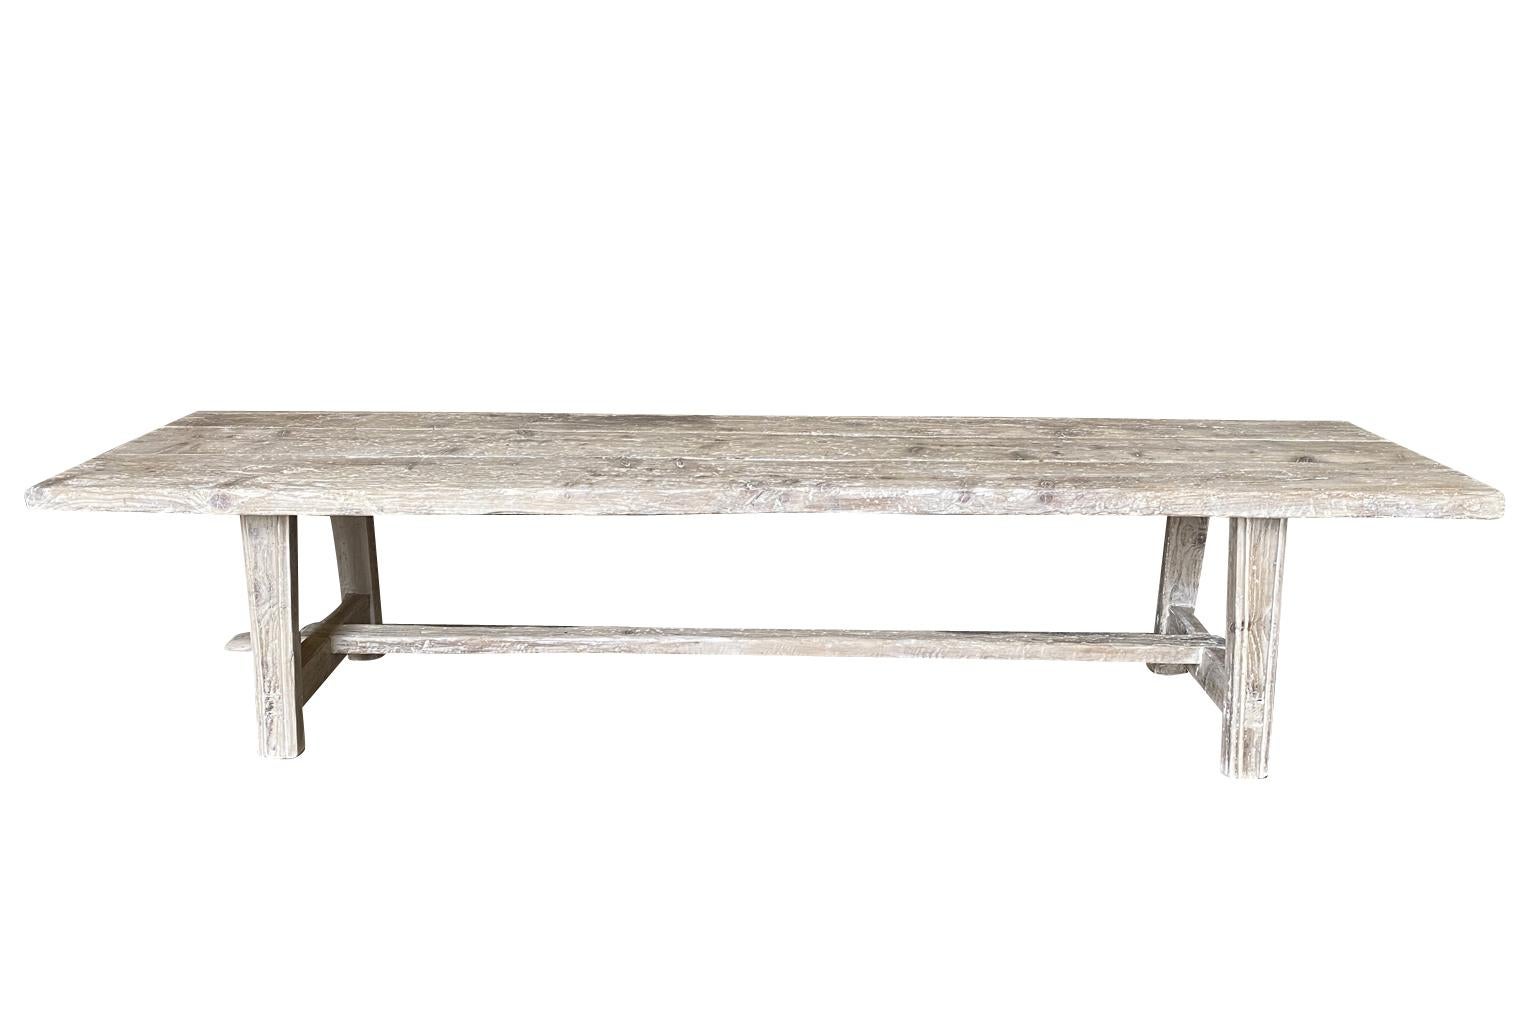 A wonderful rustic farm table - Trestle table from Spain beautifully constructed from antique Meleze - very hard pine. Wonderful Minimalist design. Perfect for large gatherings.